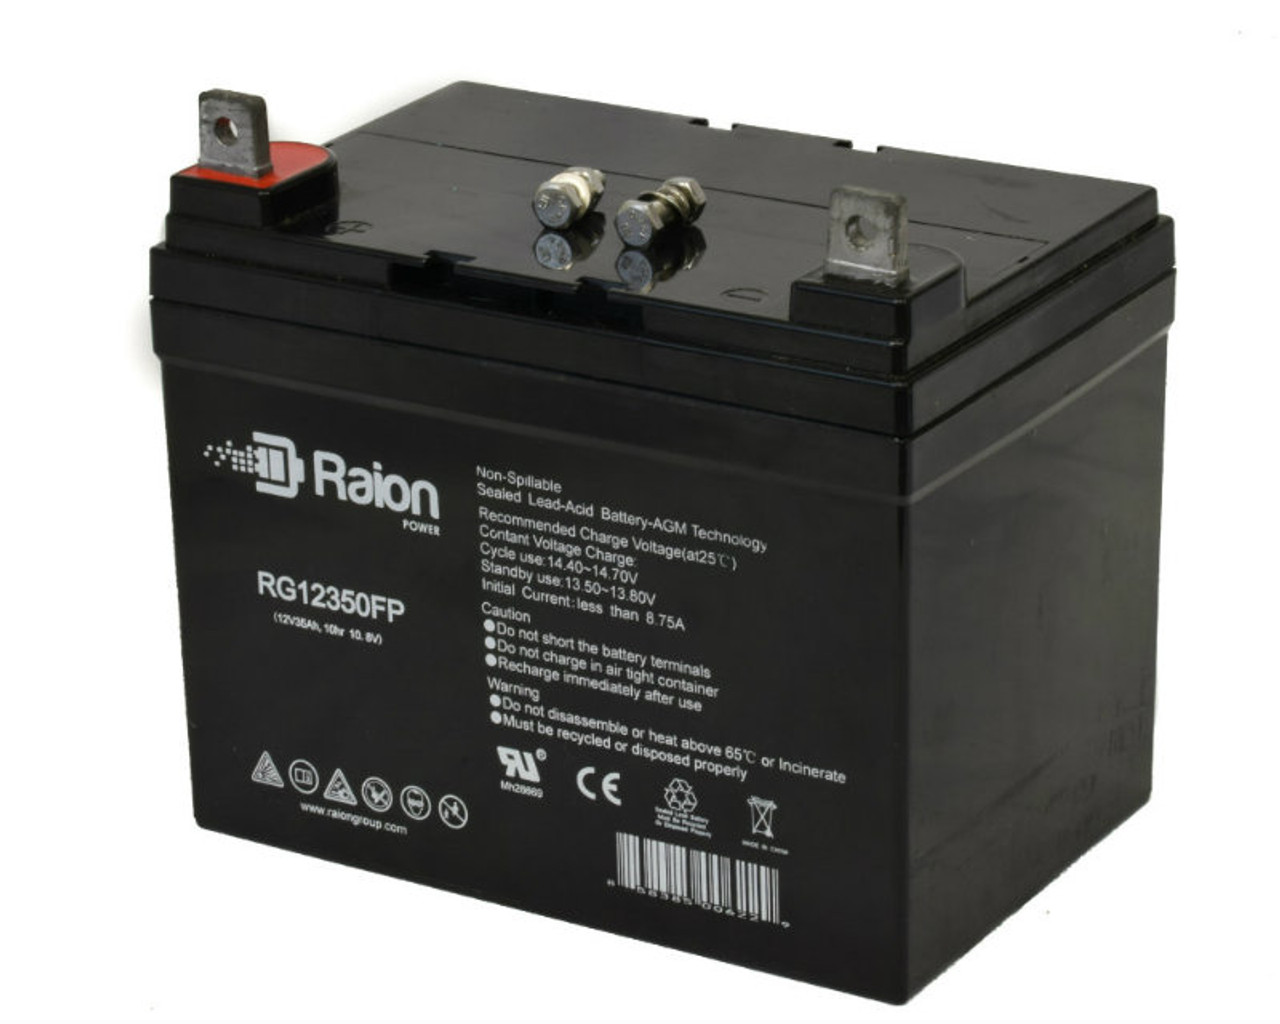 Raion Power Replacement 12V 35Ah RG12350FP Battery for Sabre 2254HV